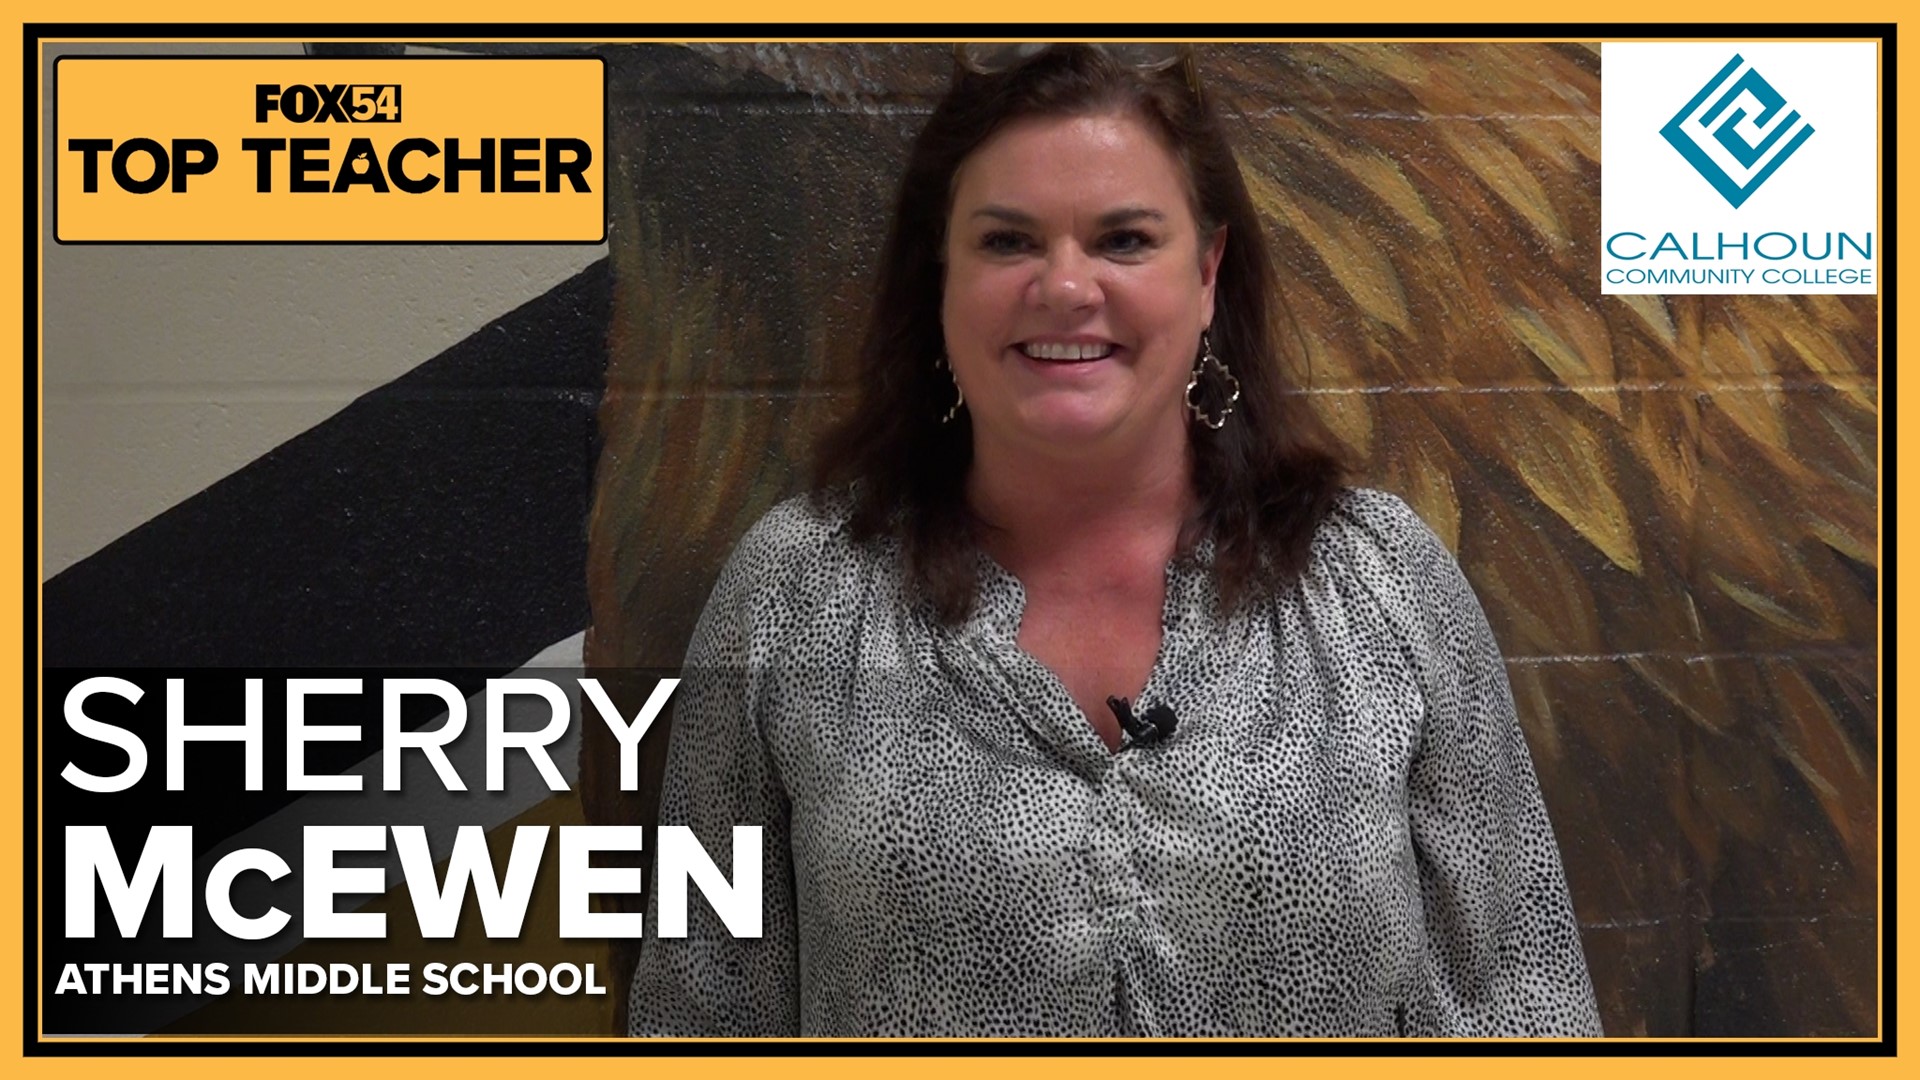 Sherry McEwen is surprised as Top Teacher at Athens Middle School